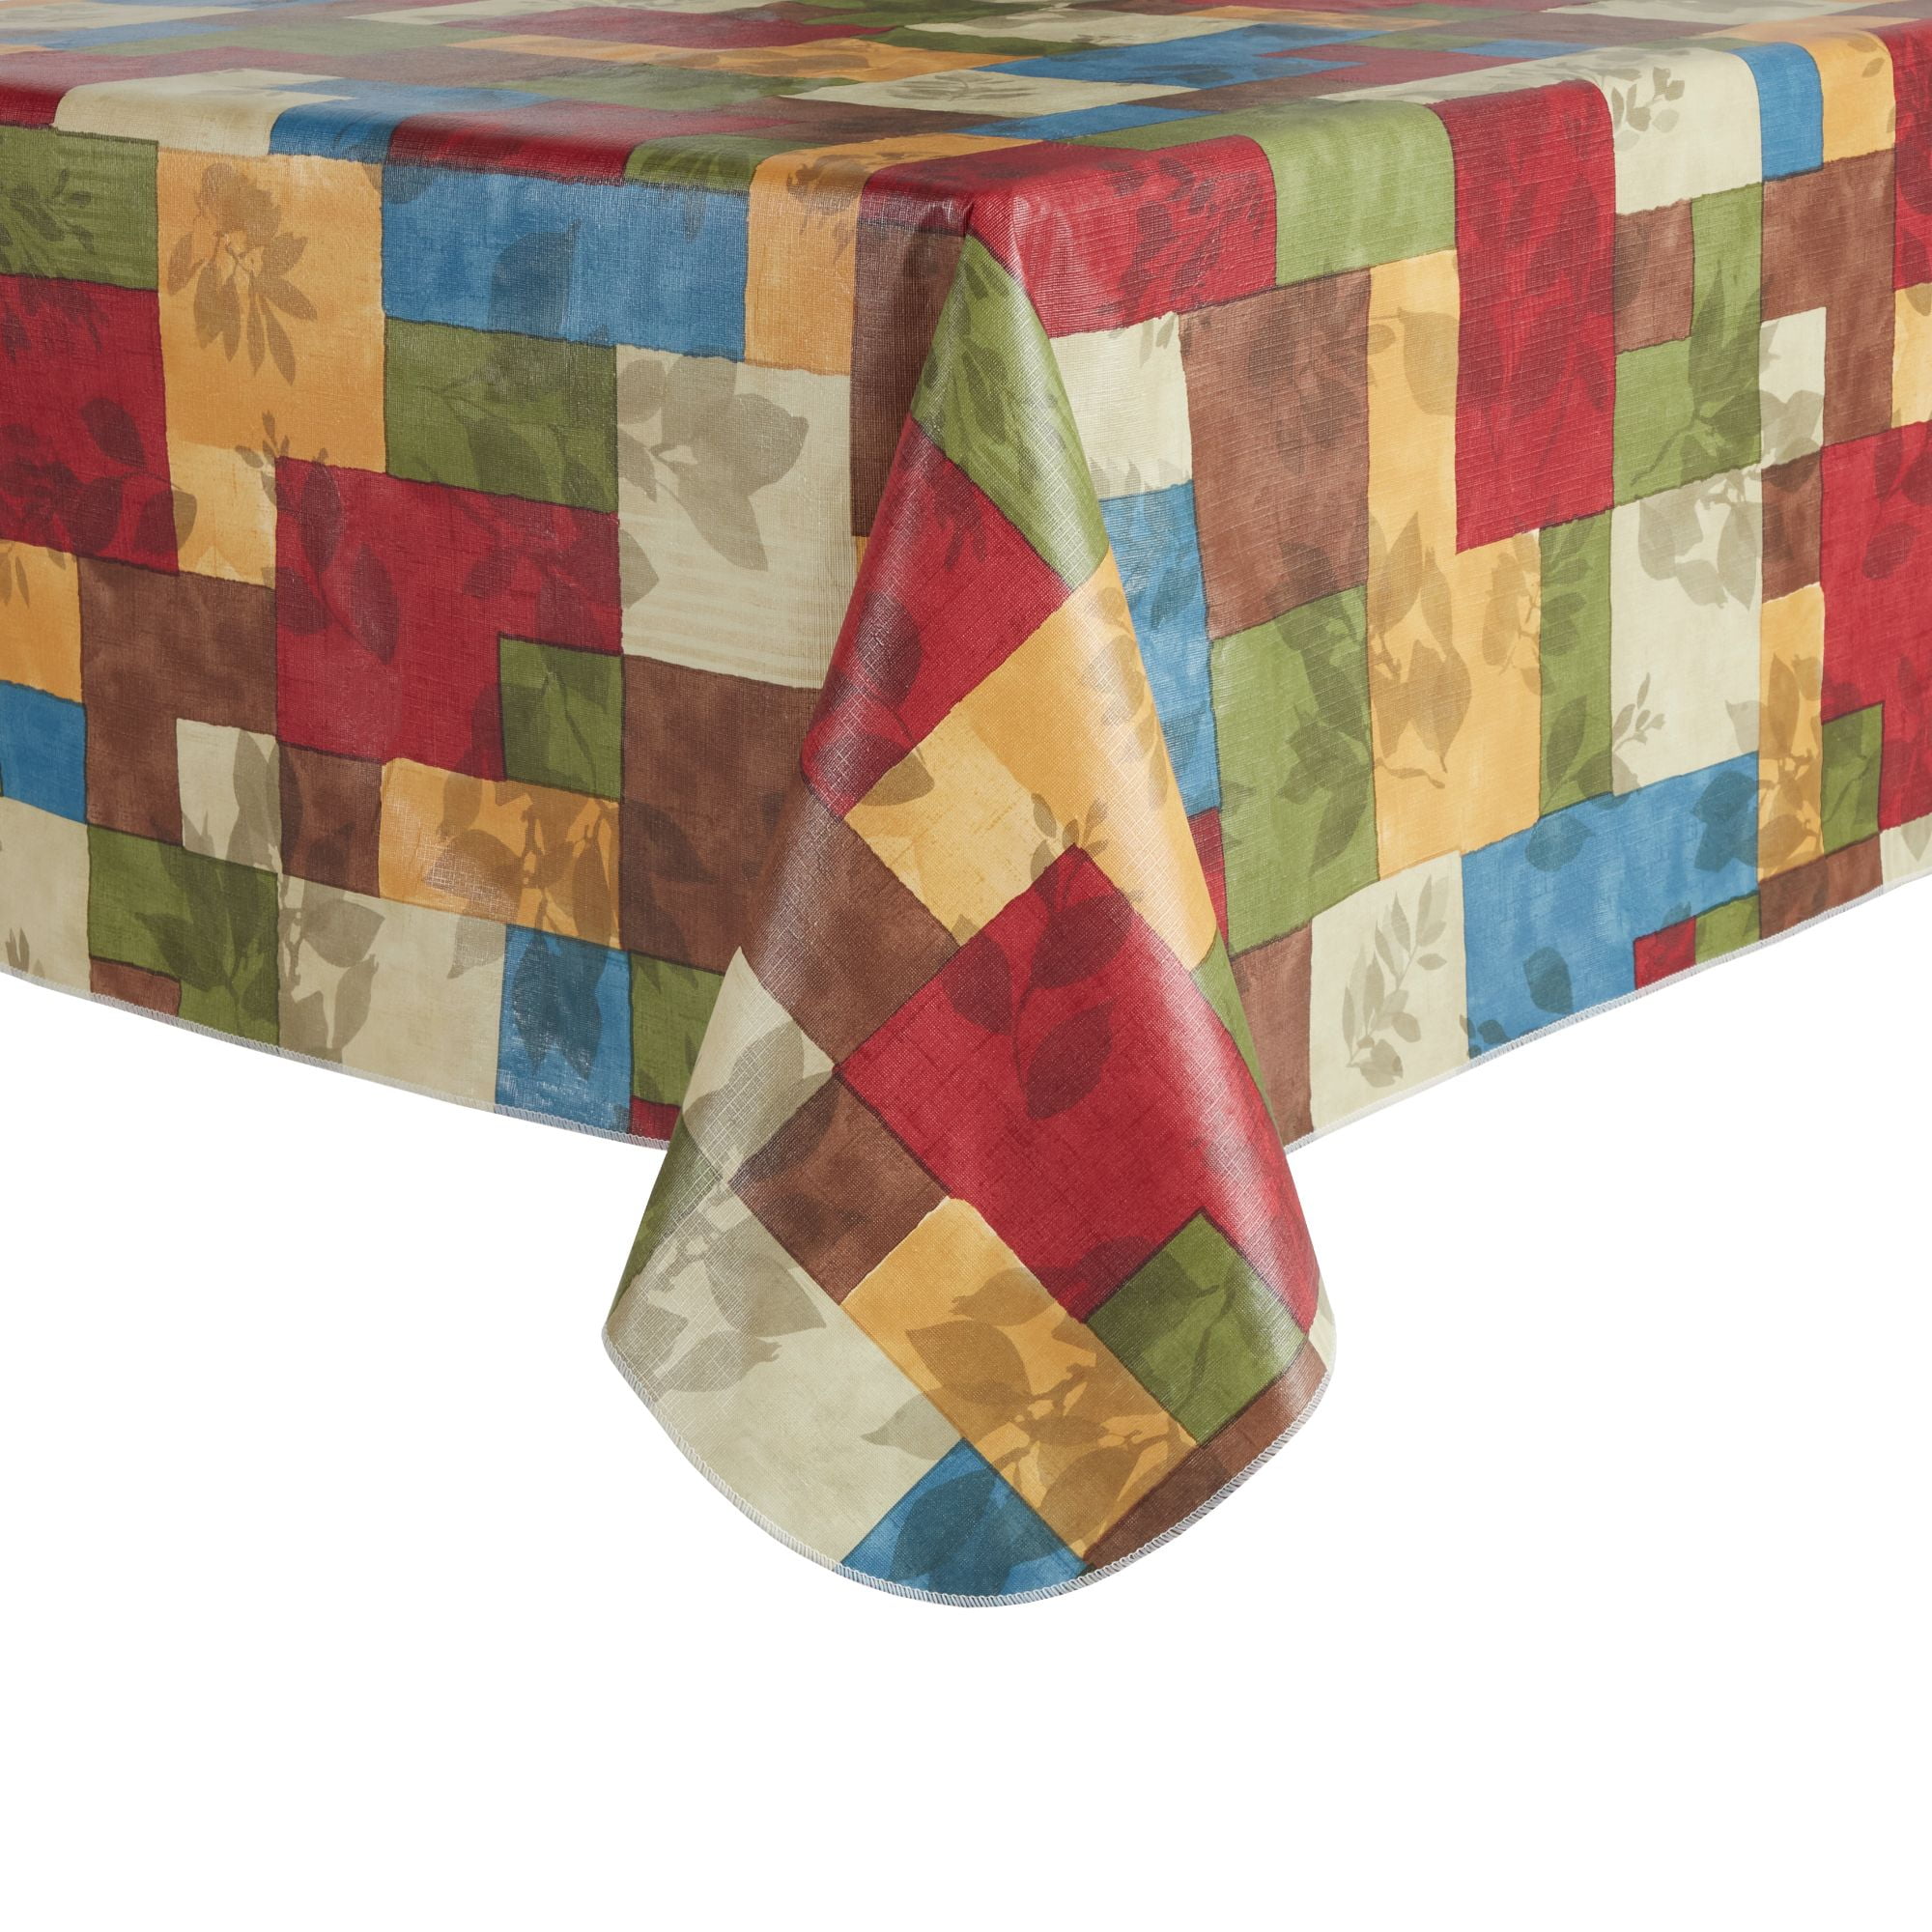 Mainstays Cortana PEVA Tablecloth, Multi, 60"W x 102"L Rectangle, Available in various sizes